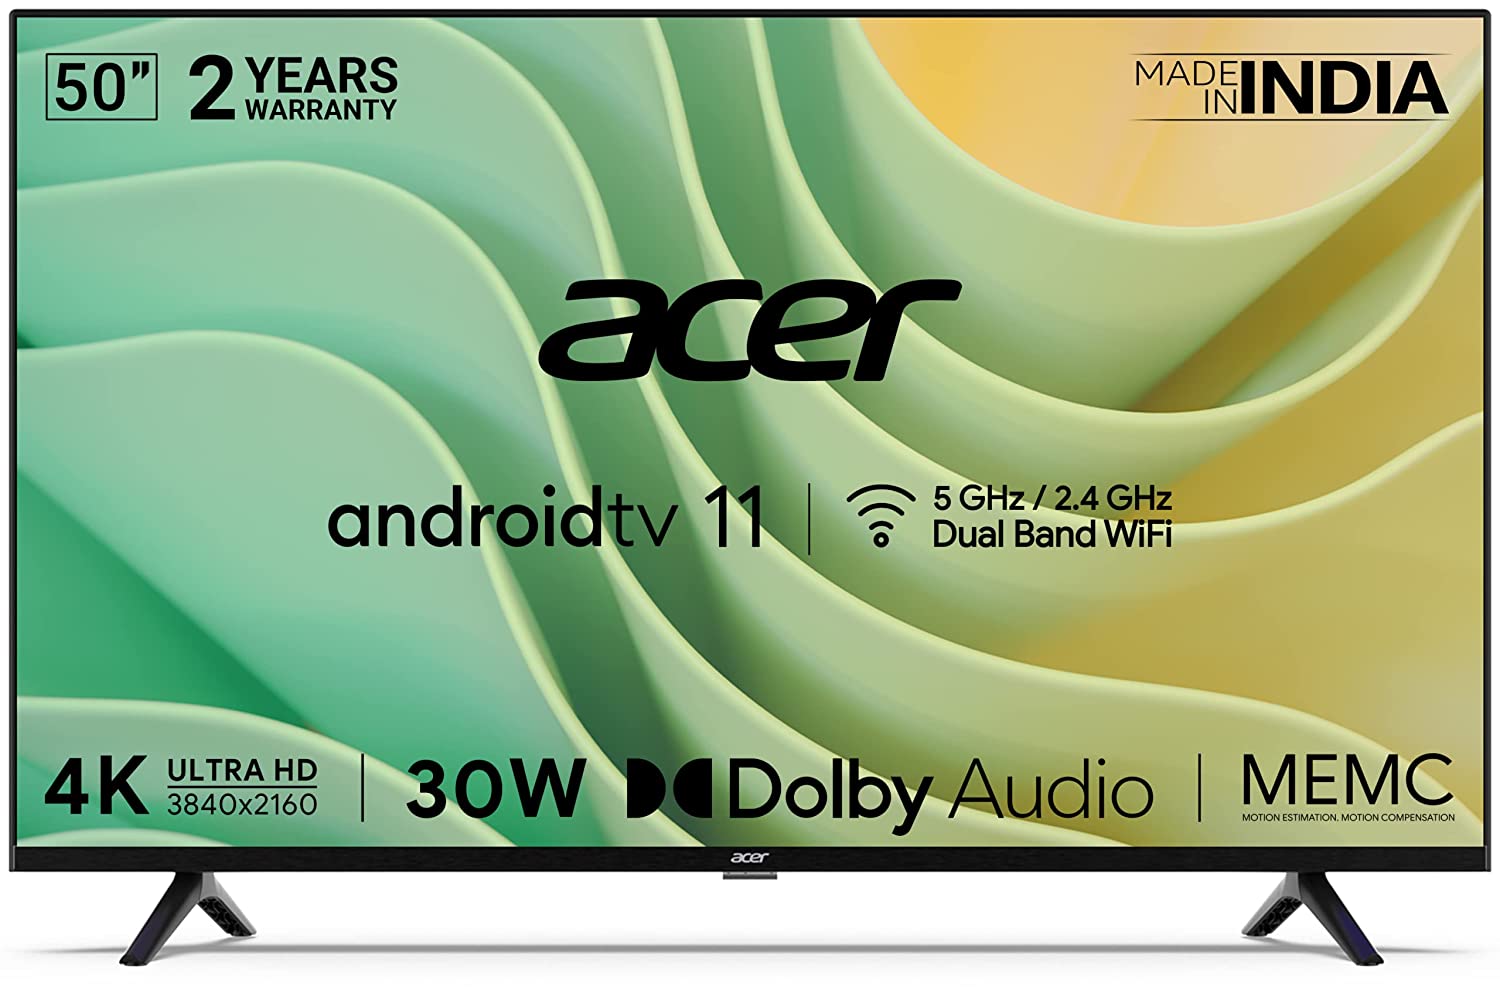 Acer 50 inches I Series 4K Android Smart LED TV